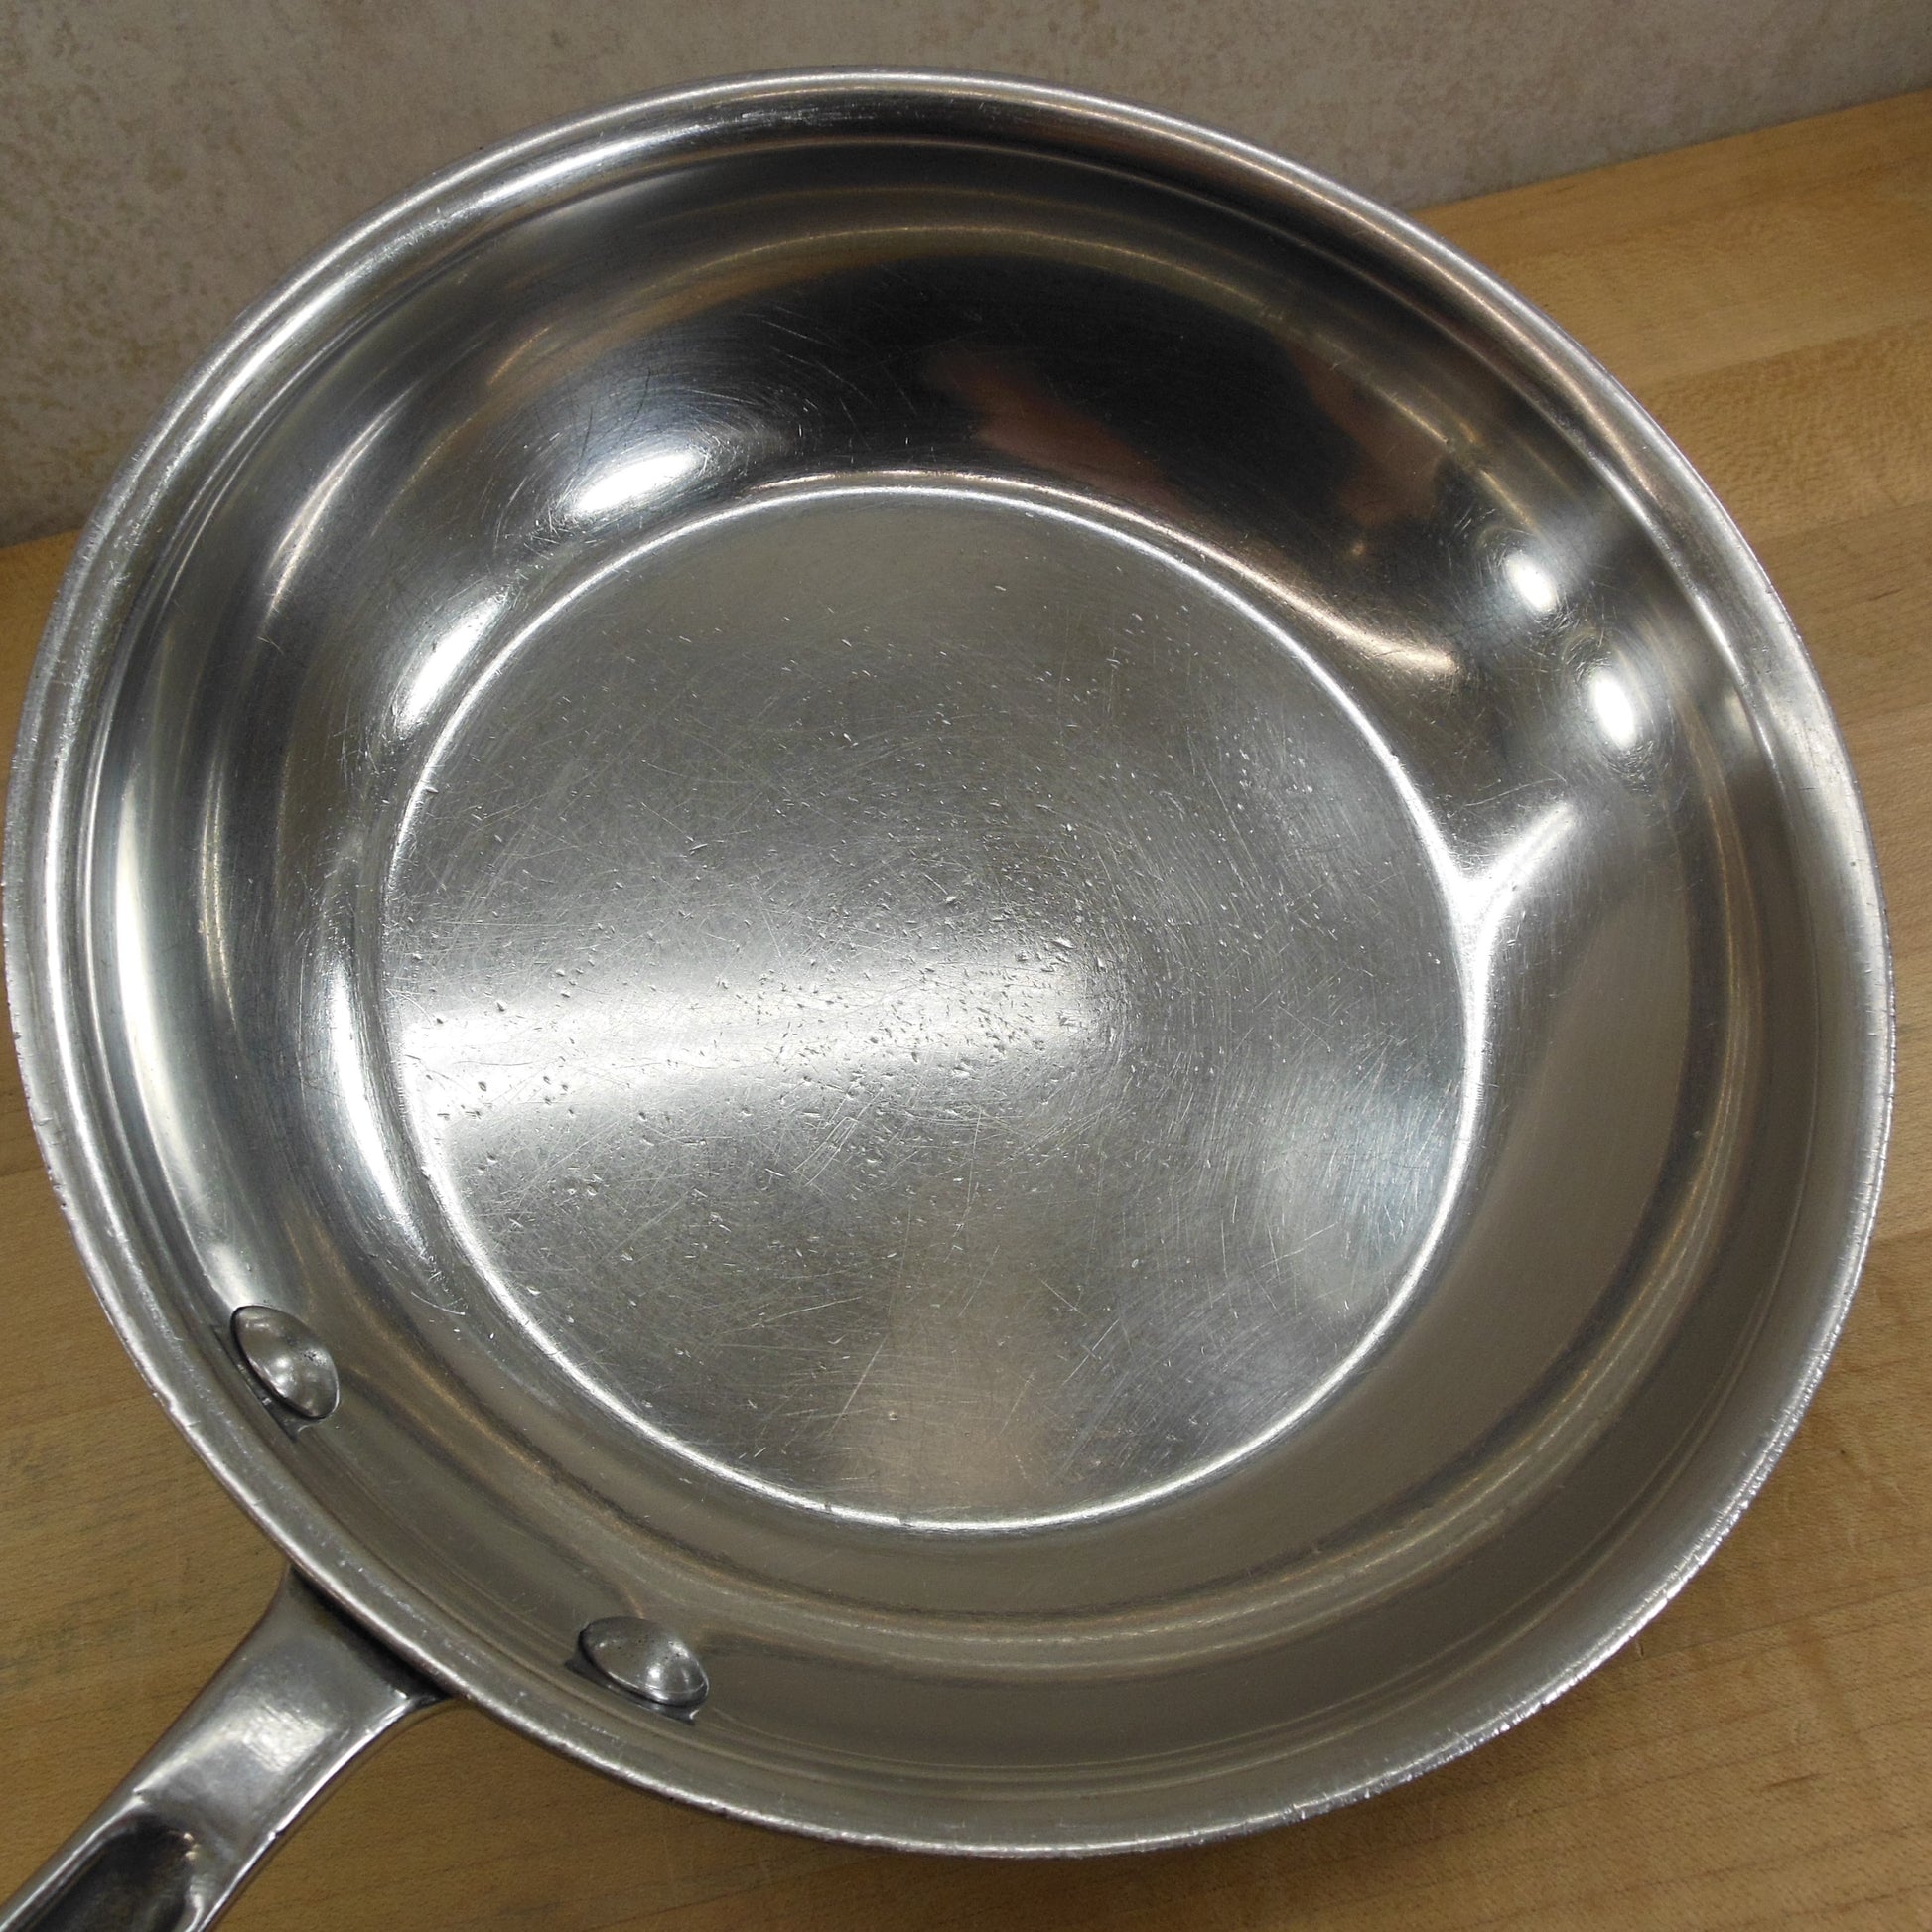 All-Clad Ltd Stainless Anodized 8.5" Fry Pan Skillet - Discounted Prick Marks